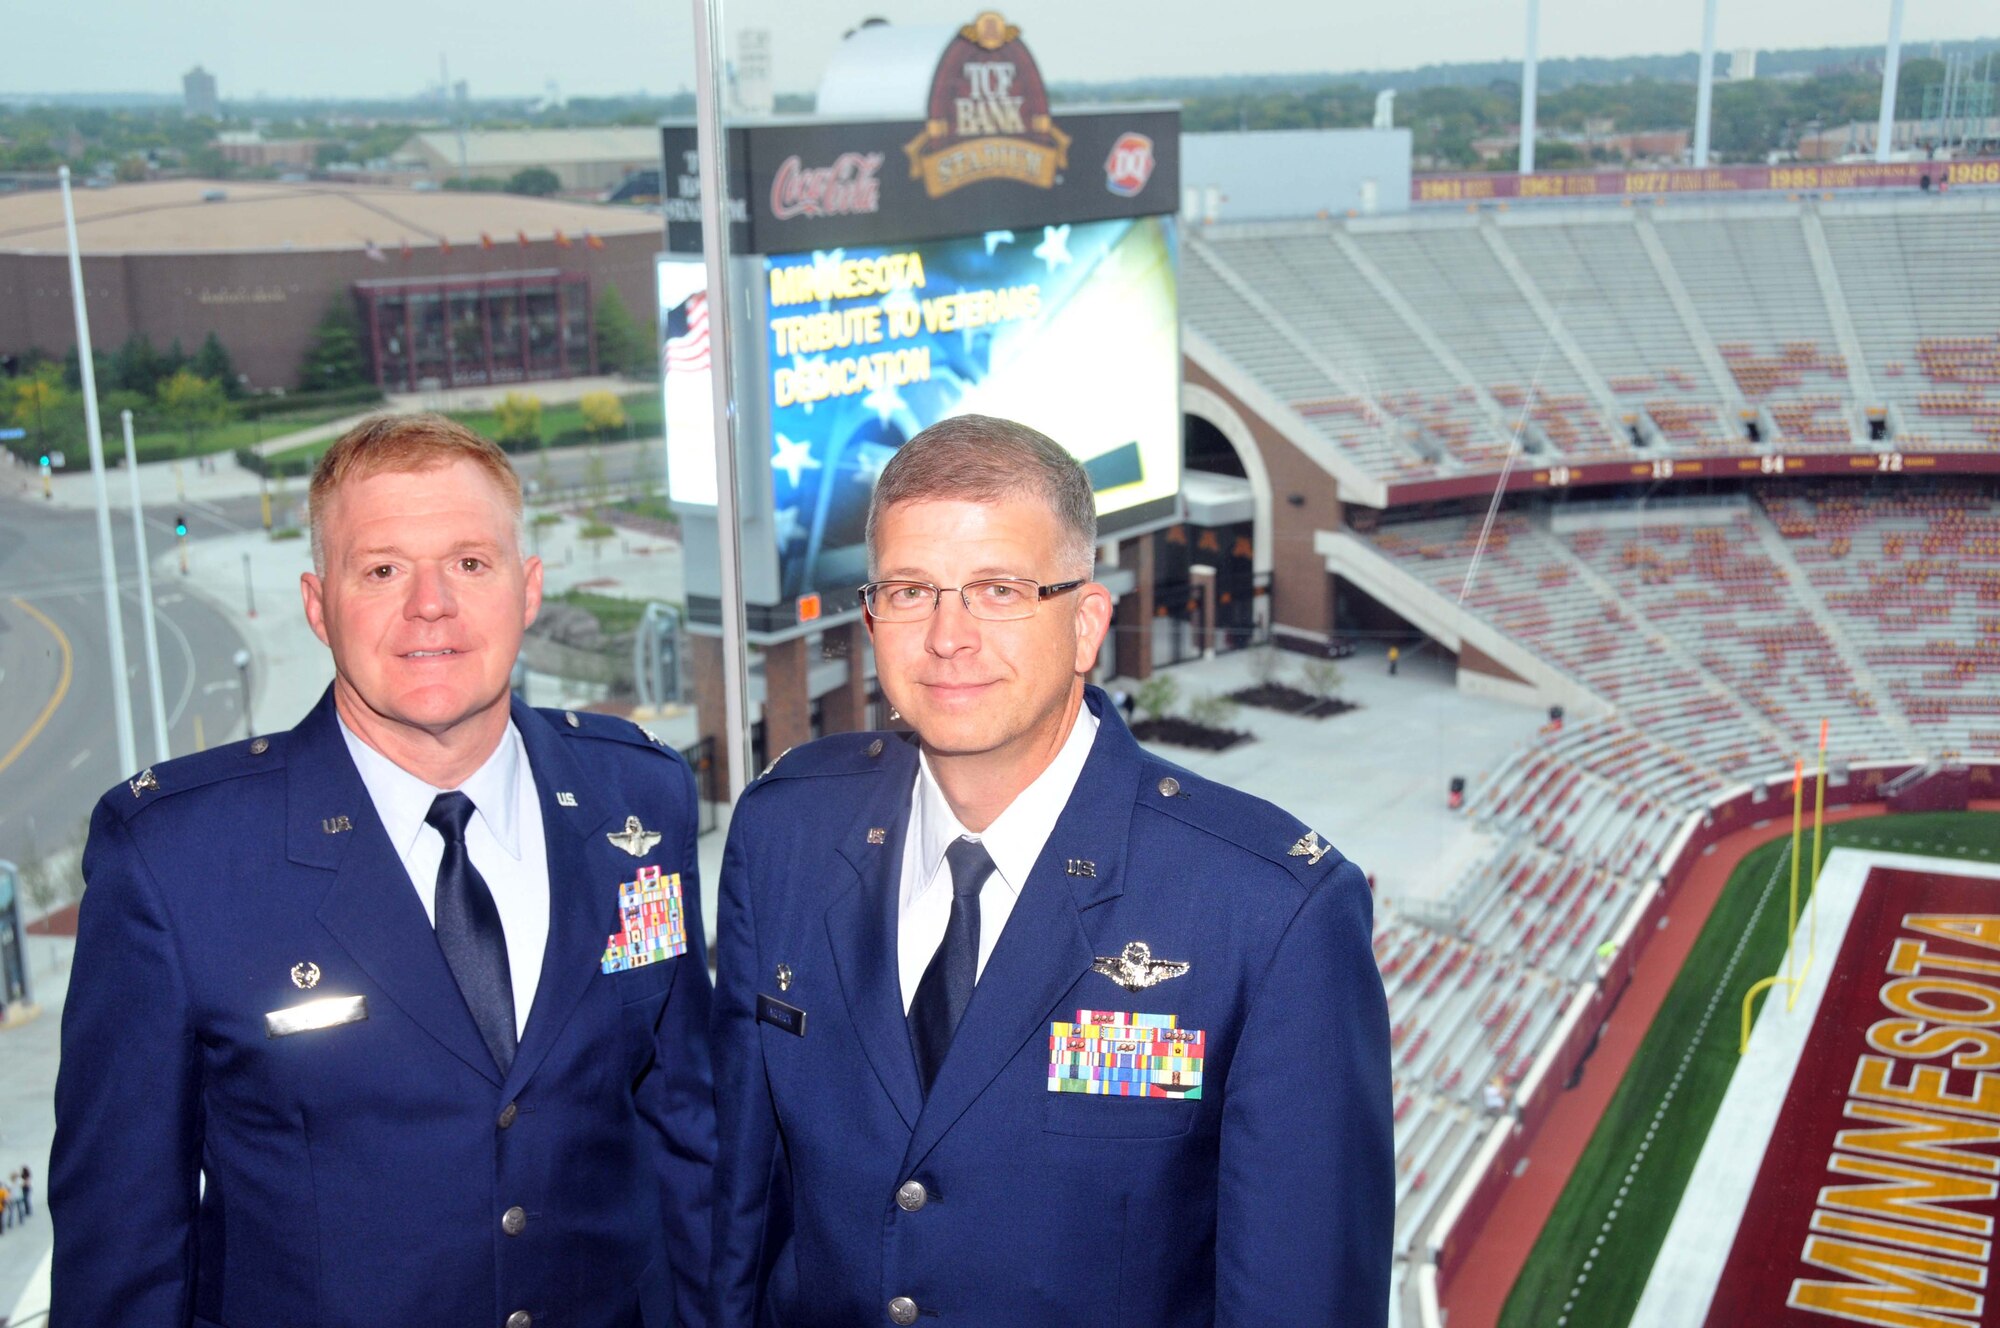 Col. Ron Wilt, 934th Operations Group commander (left) and Col. Tim Tarchick, 934th Airlift Wing commander. Attend the Veteran?s Memorial dedication at the new University of Minnesota Gopher football stadium Sept. 11.  The memorial wall is dedicated to all veterans and will be used for future ceremonies honoring them.  (Air Force Photo/Master Sgt. Paul Zadach)  